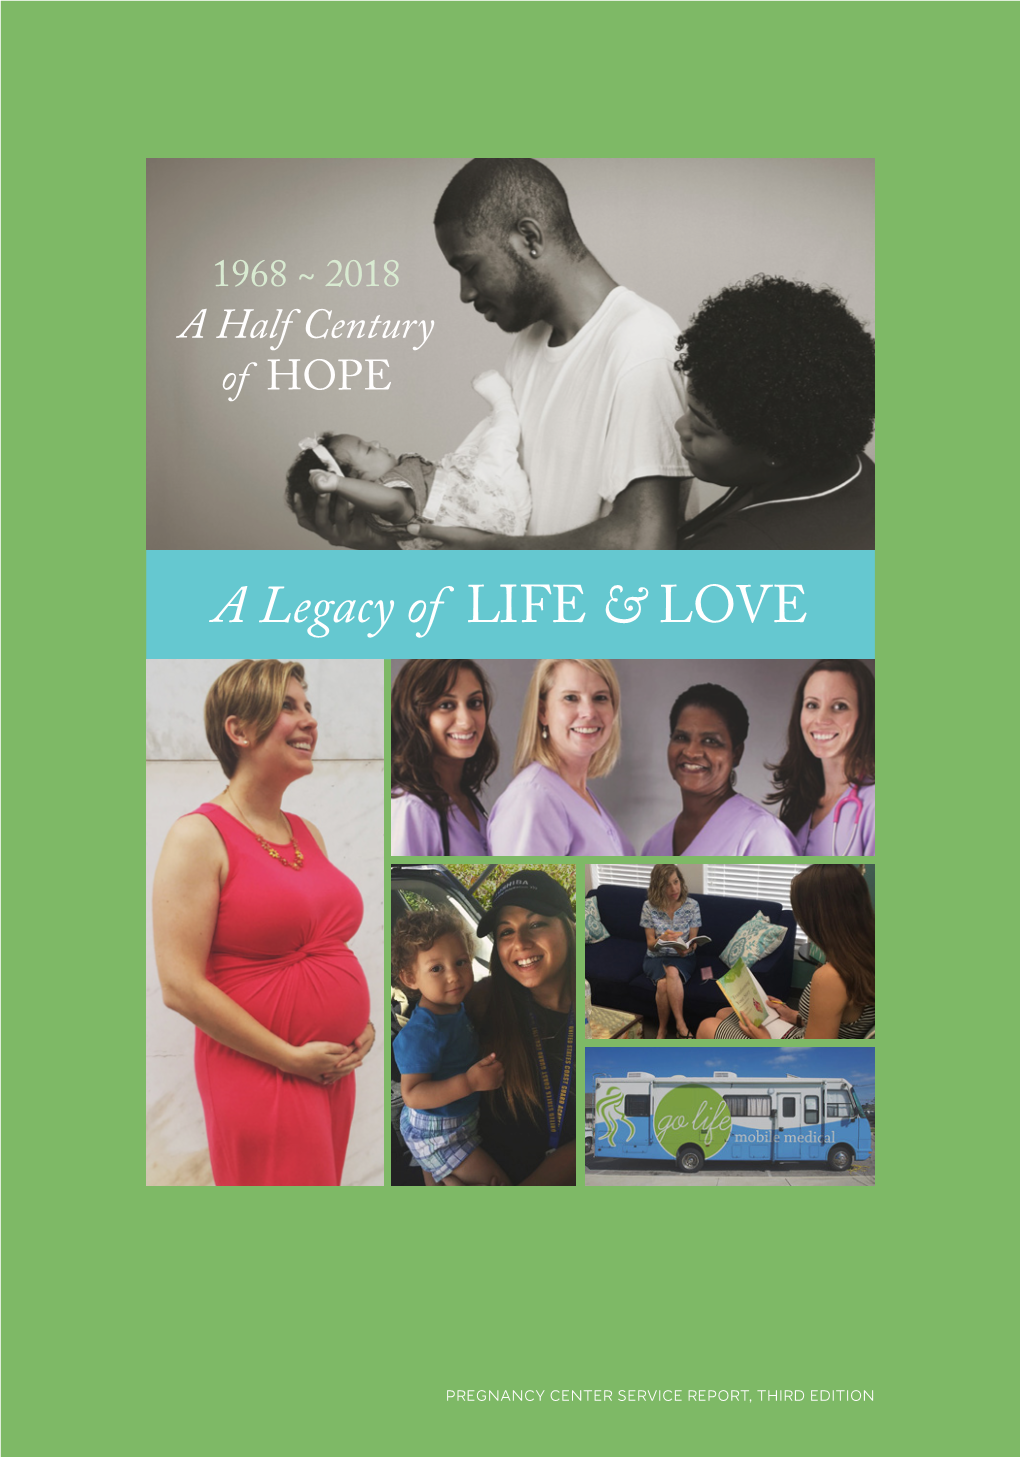 A Legacy of LIFE & LOVE